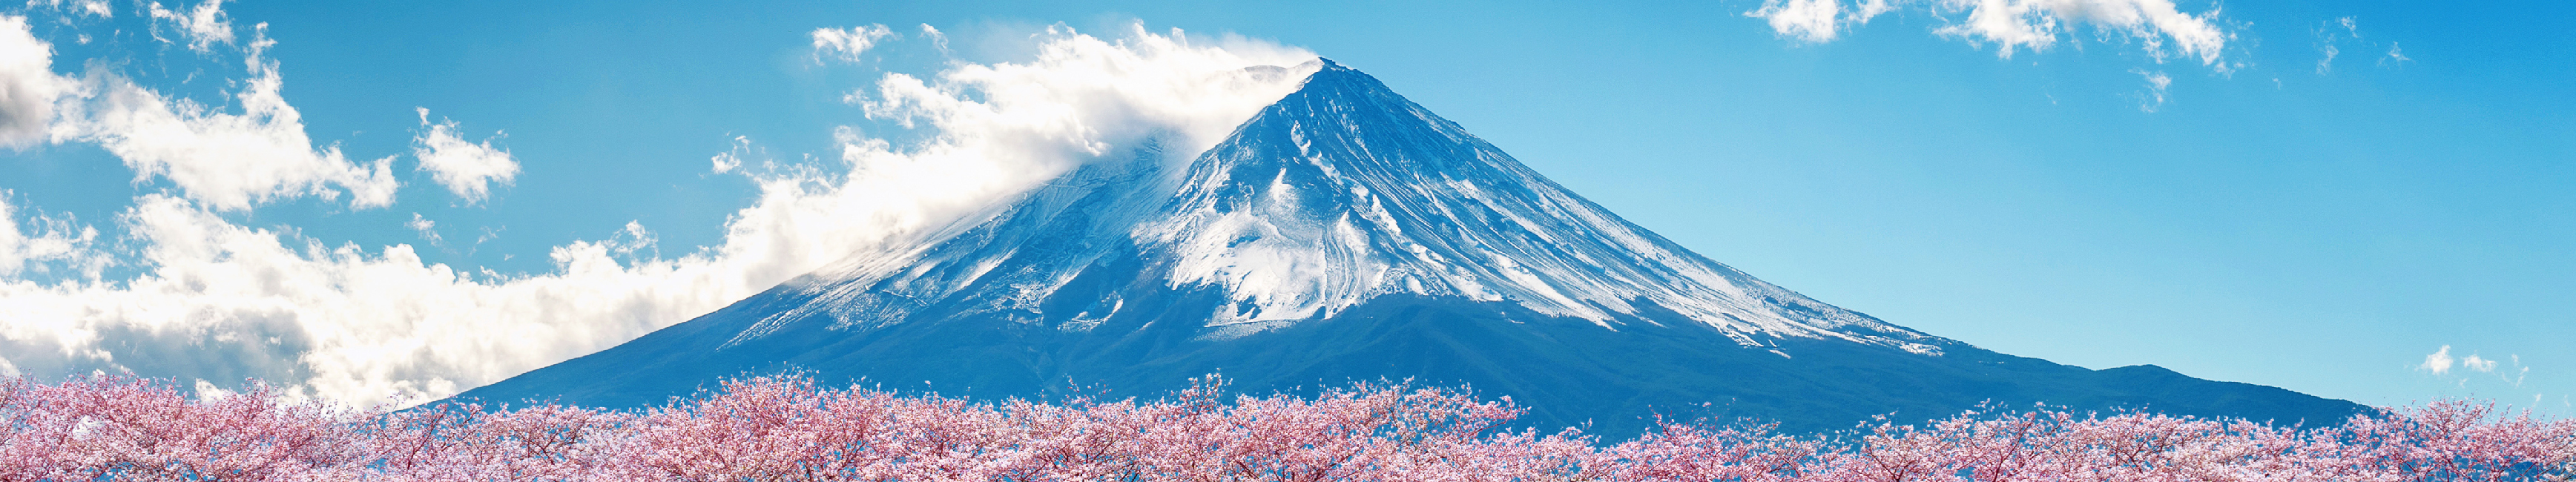 Tokyo Fuji Japan Tour Comparison and 10 Best Spots to See Mt. Fuji